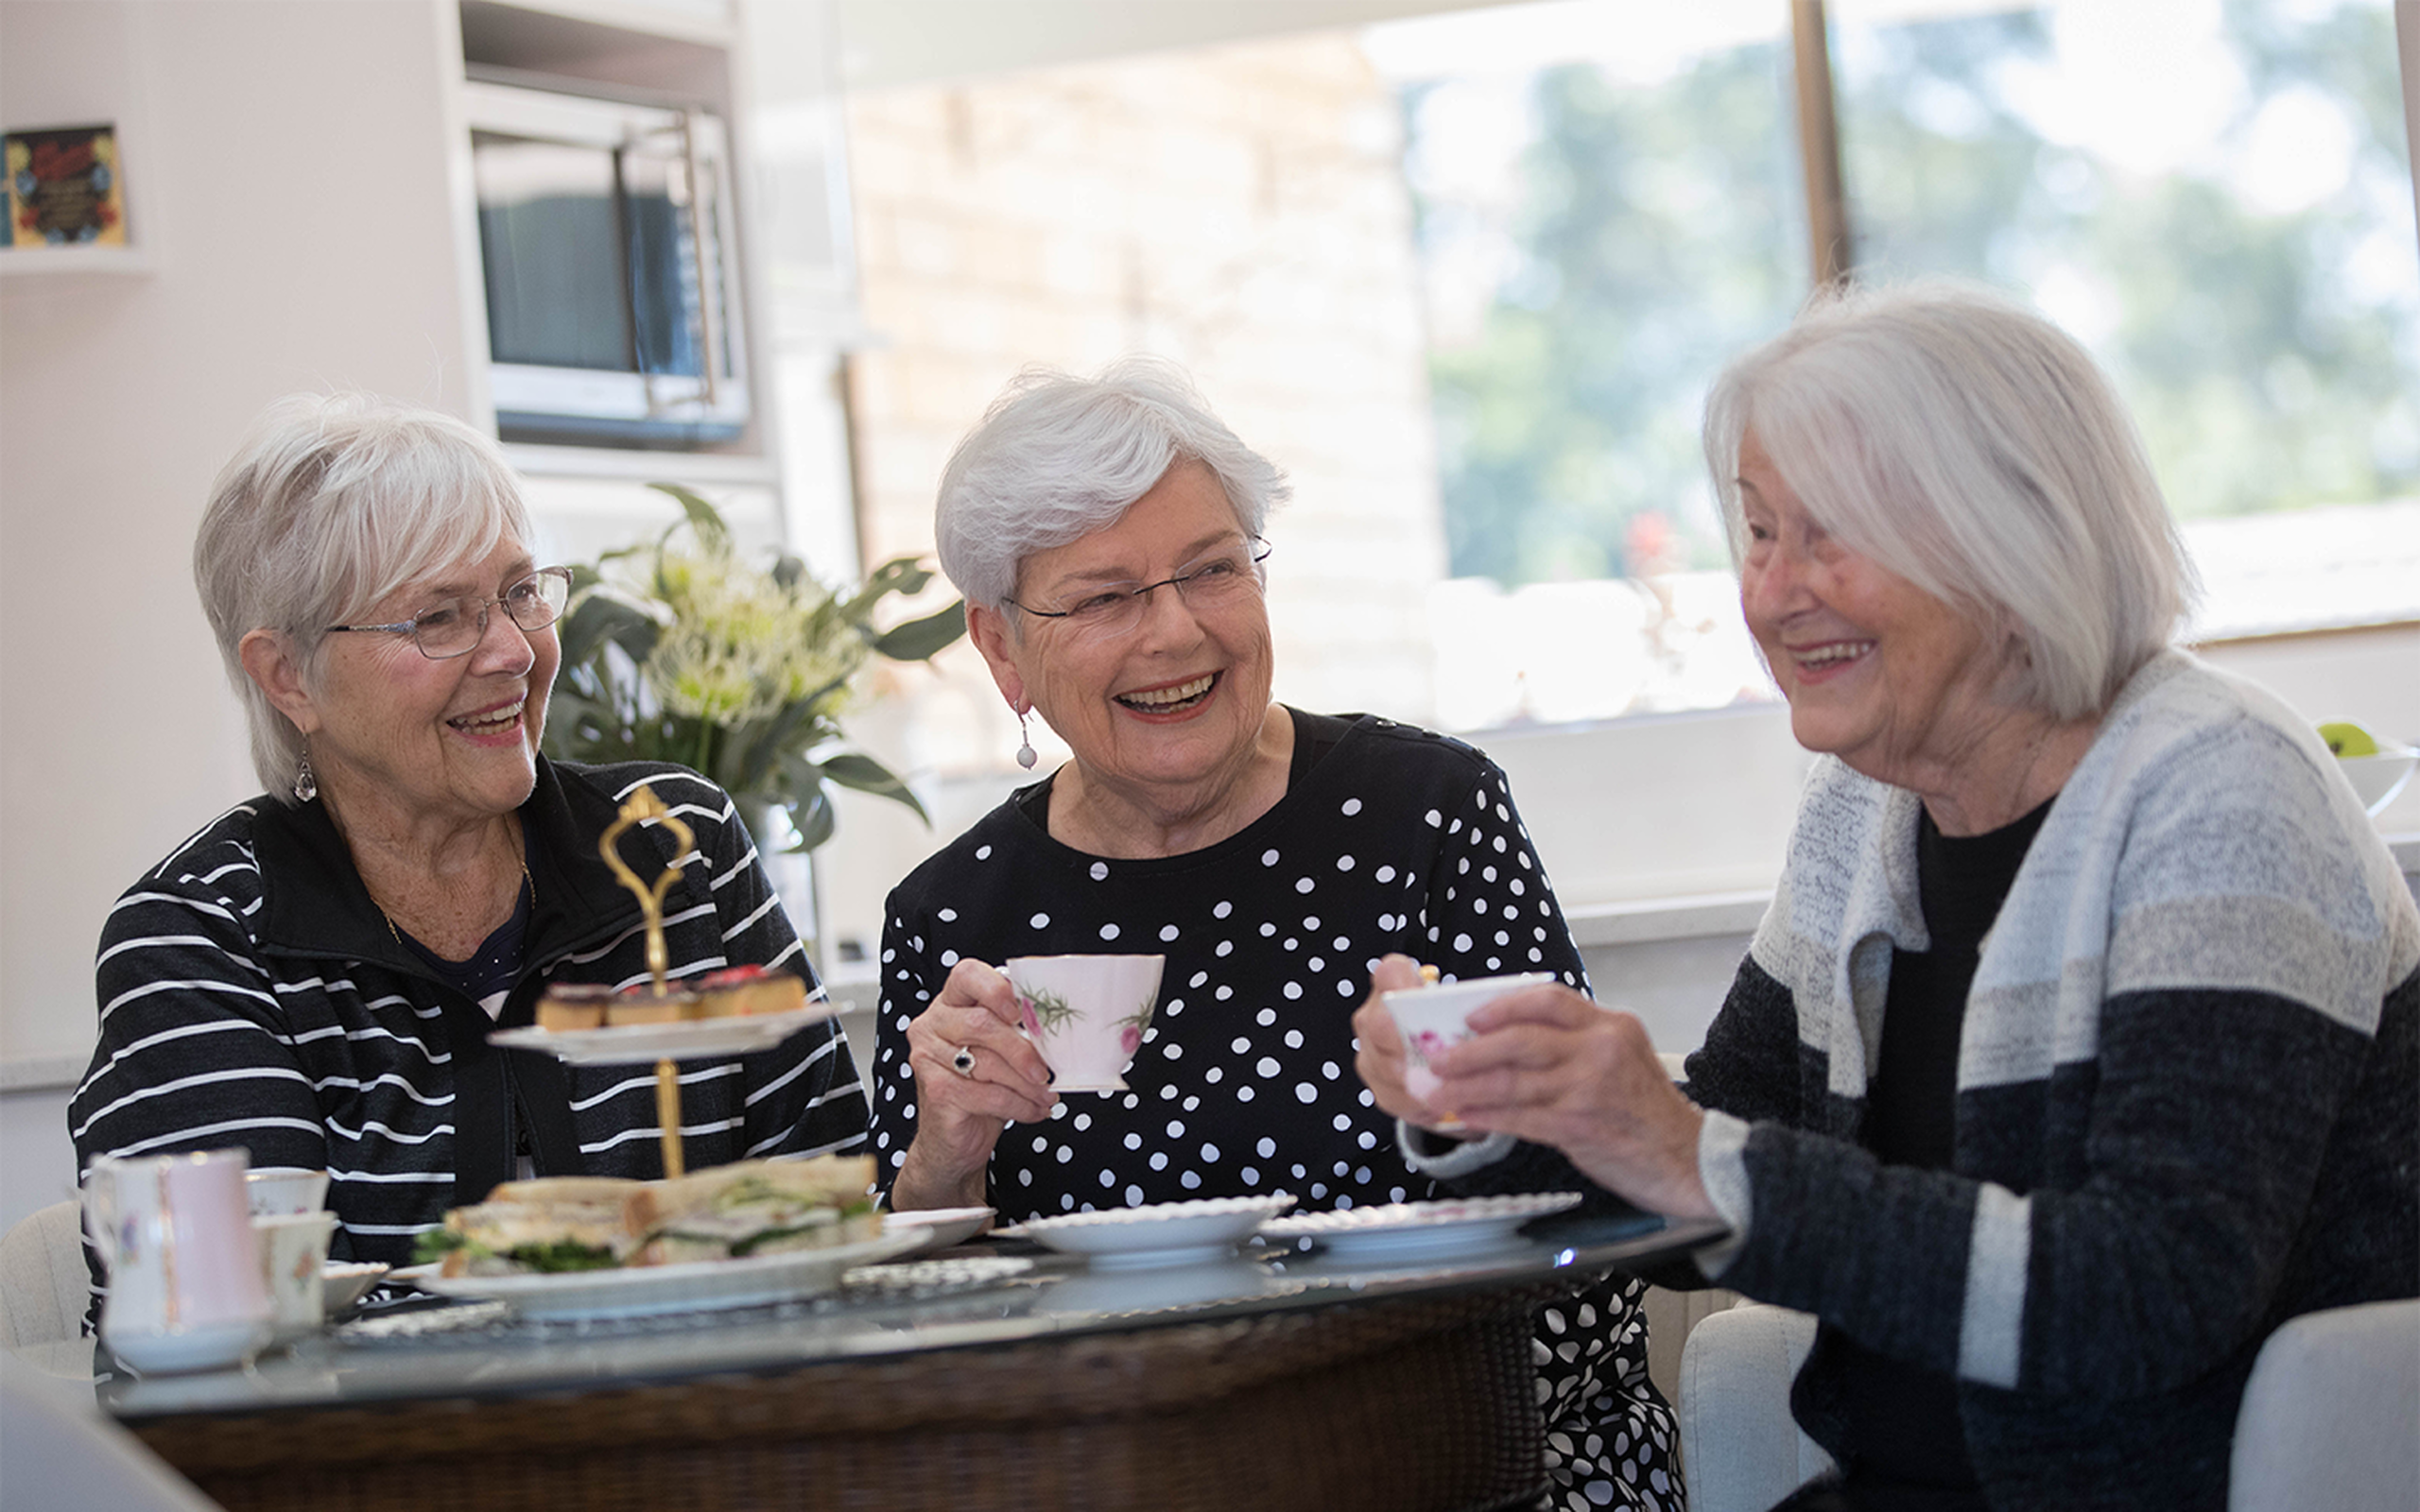 three over 55s women enjoying independent living in baptistcare retirement village socialising and having a meal during their retirement